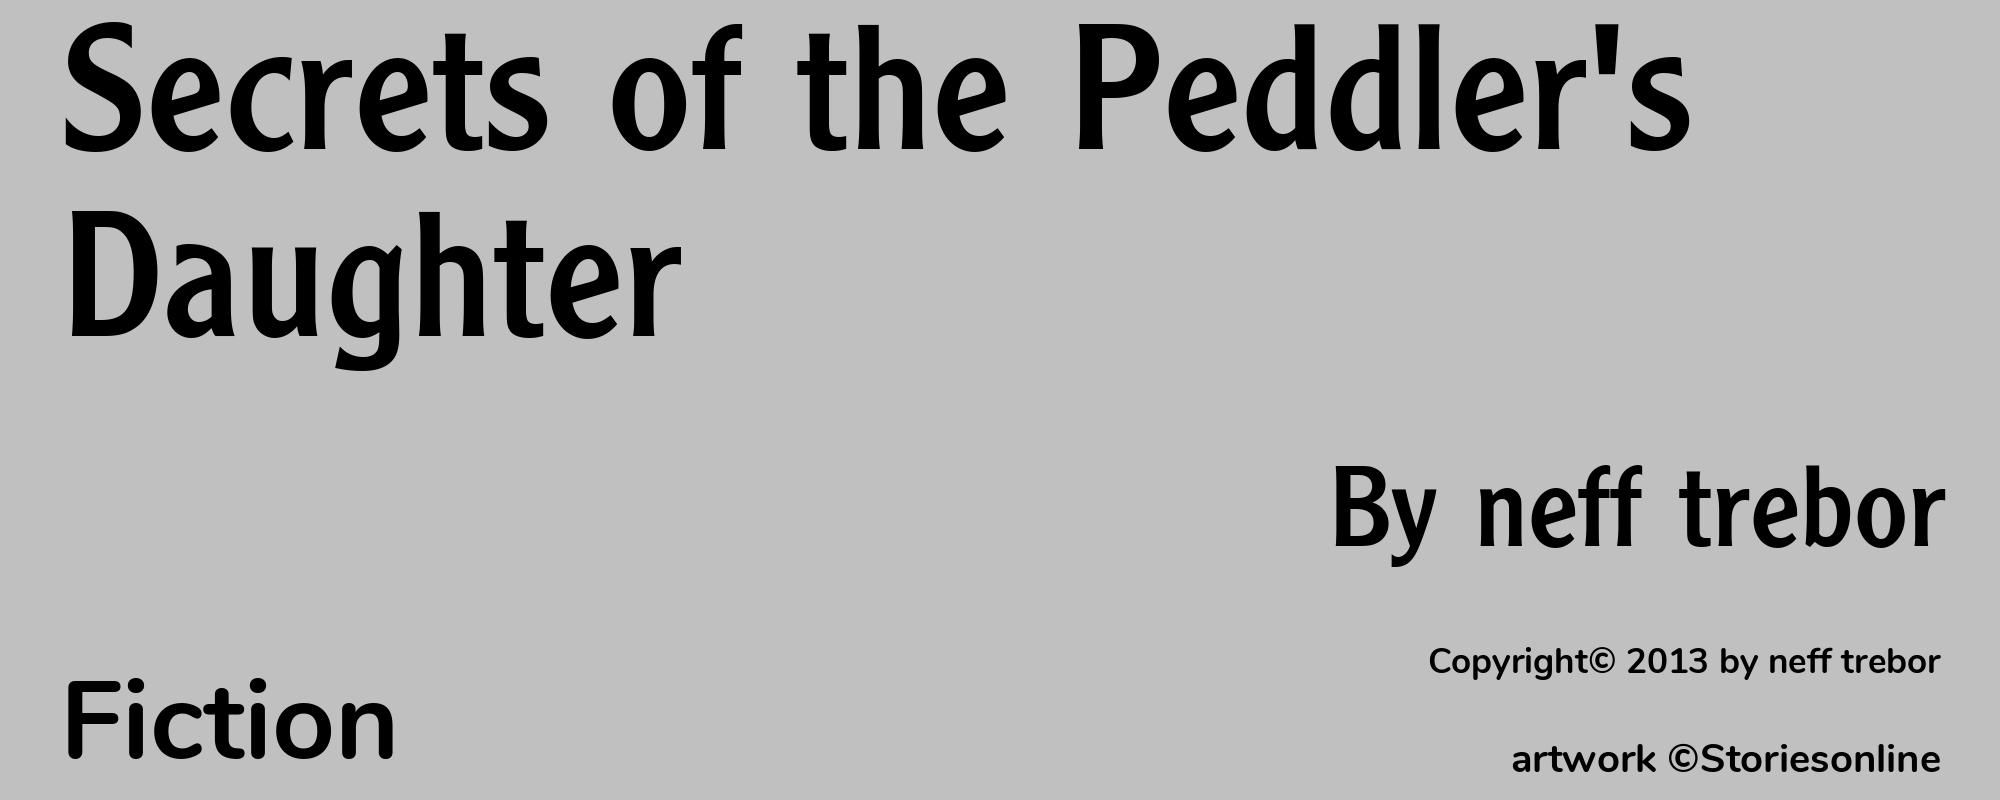 Secrets of the Peddler's Daughter - Cover